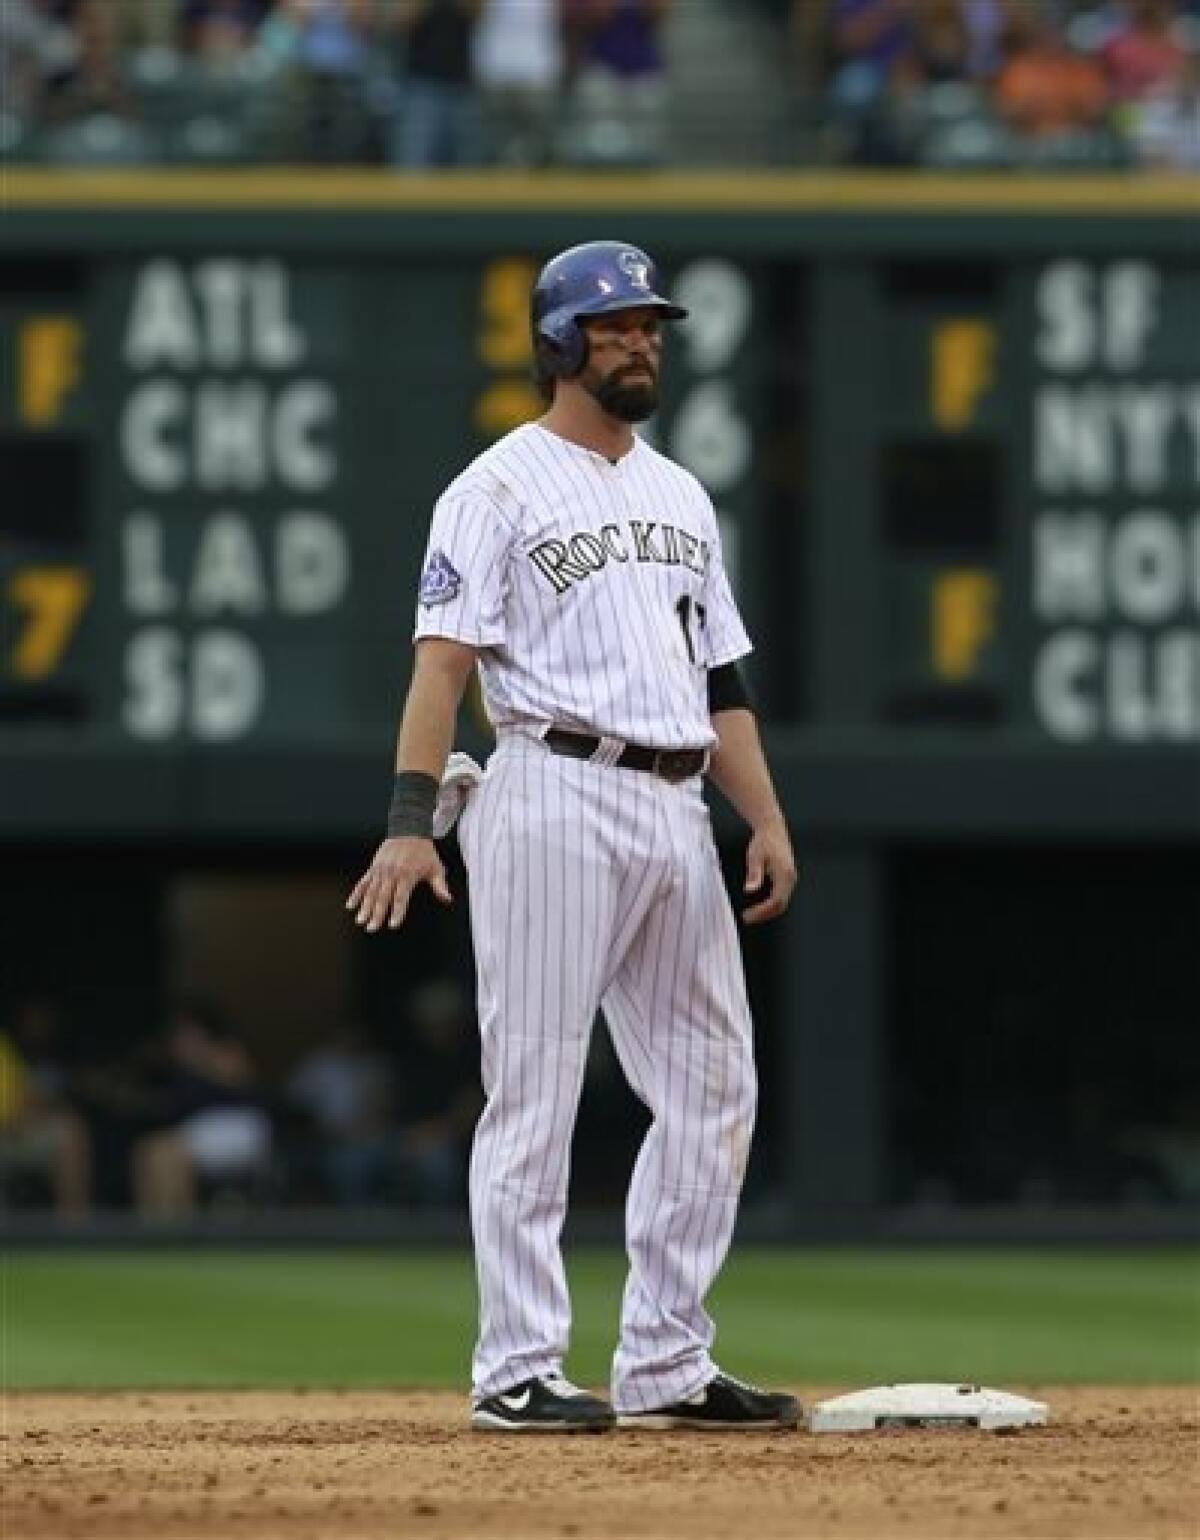 Helton to retire after 17 years with Rockies - The San Diego Union-Tribune